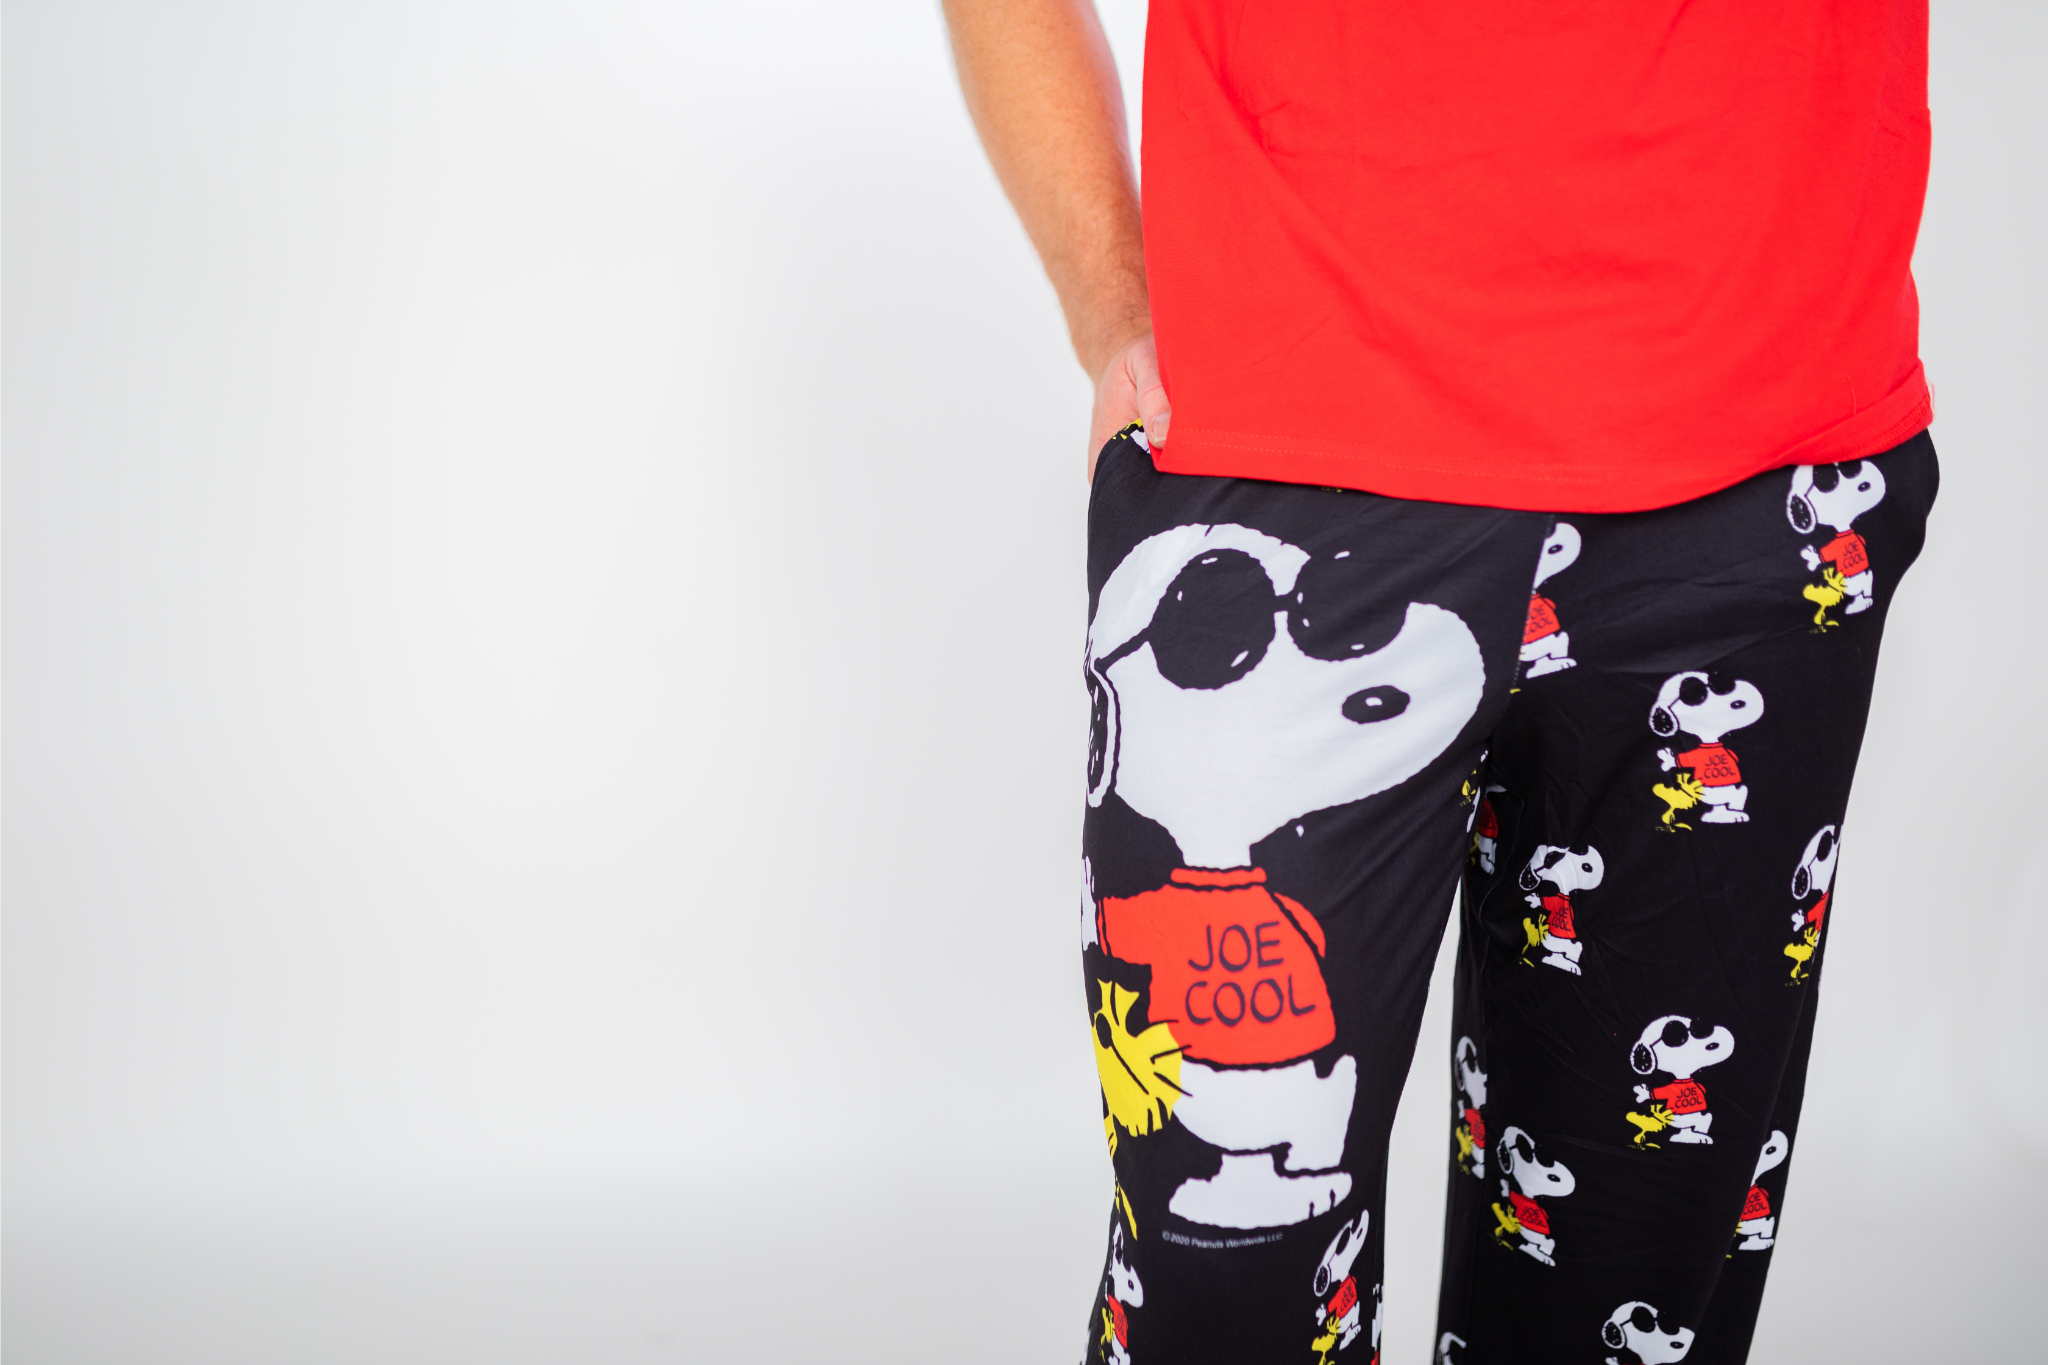 Waist down photo of model wearing Snoopy Joe Cool pajama lounge pants front view (white background)